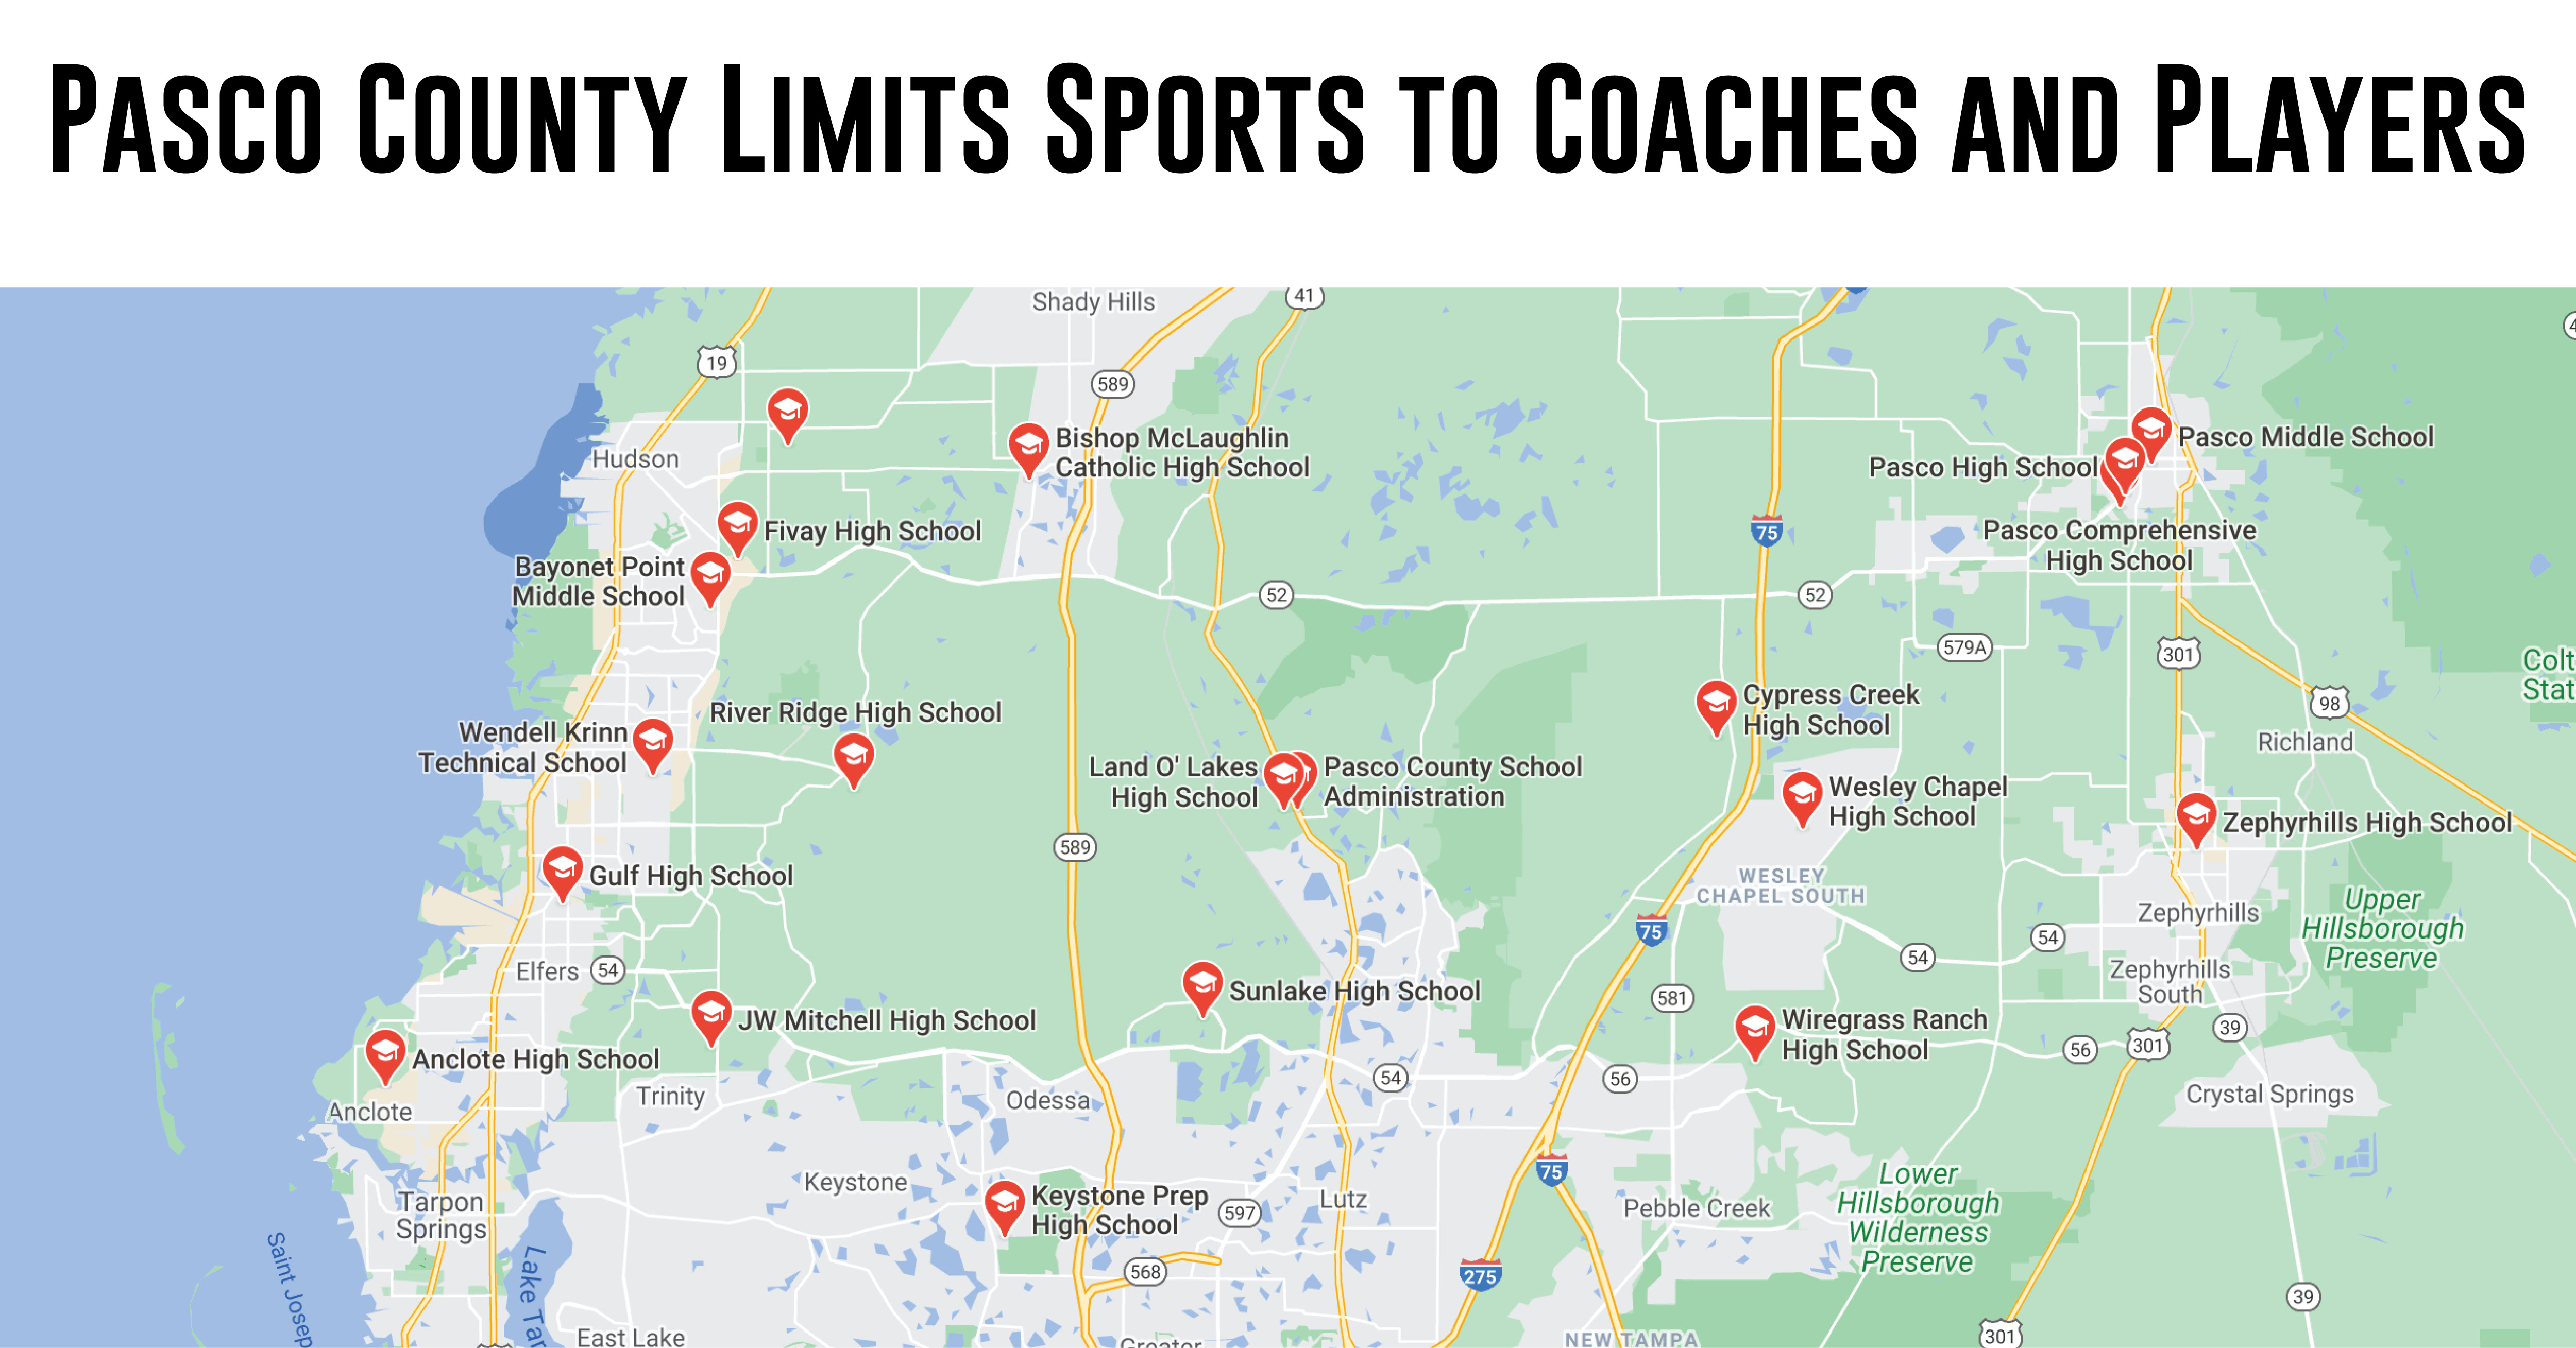 Pasco County Sports Events Limited to Coaches and Players ITG Next